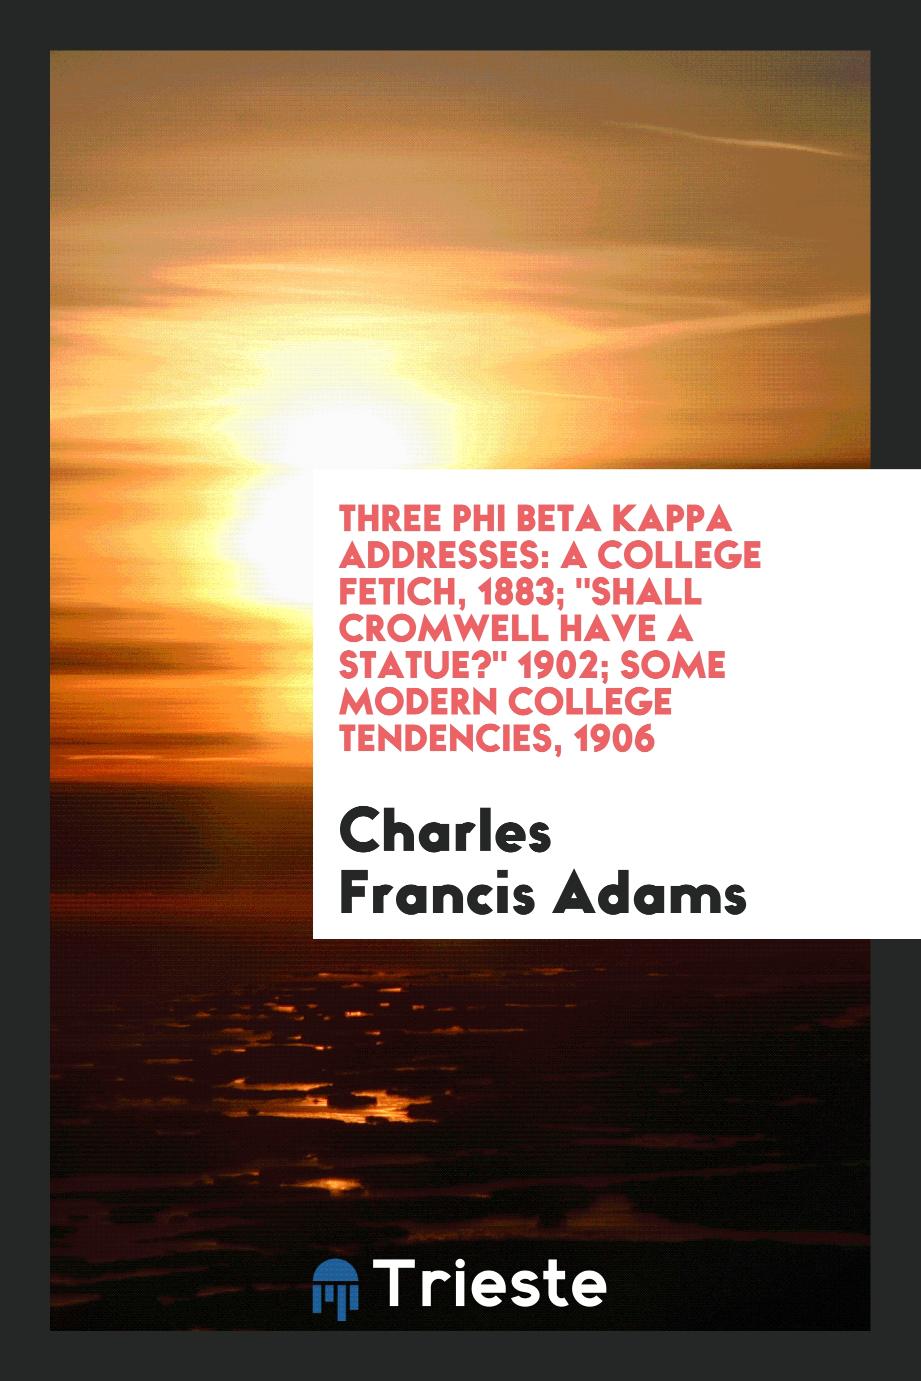 Three Phi Beta Kappa addresses: A college fetich, 1883; "Shall Cromwell have a statue?" 1902; Some modern college tendencies, 1906